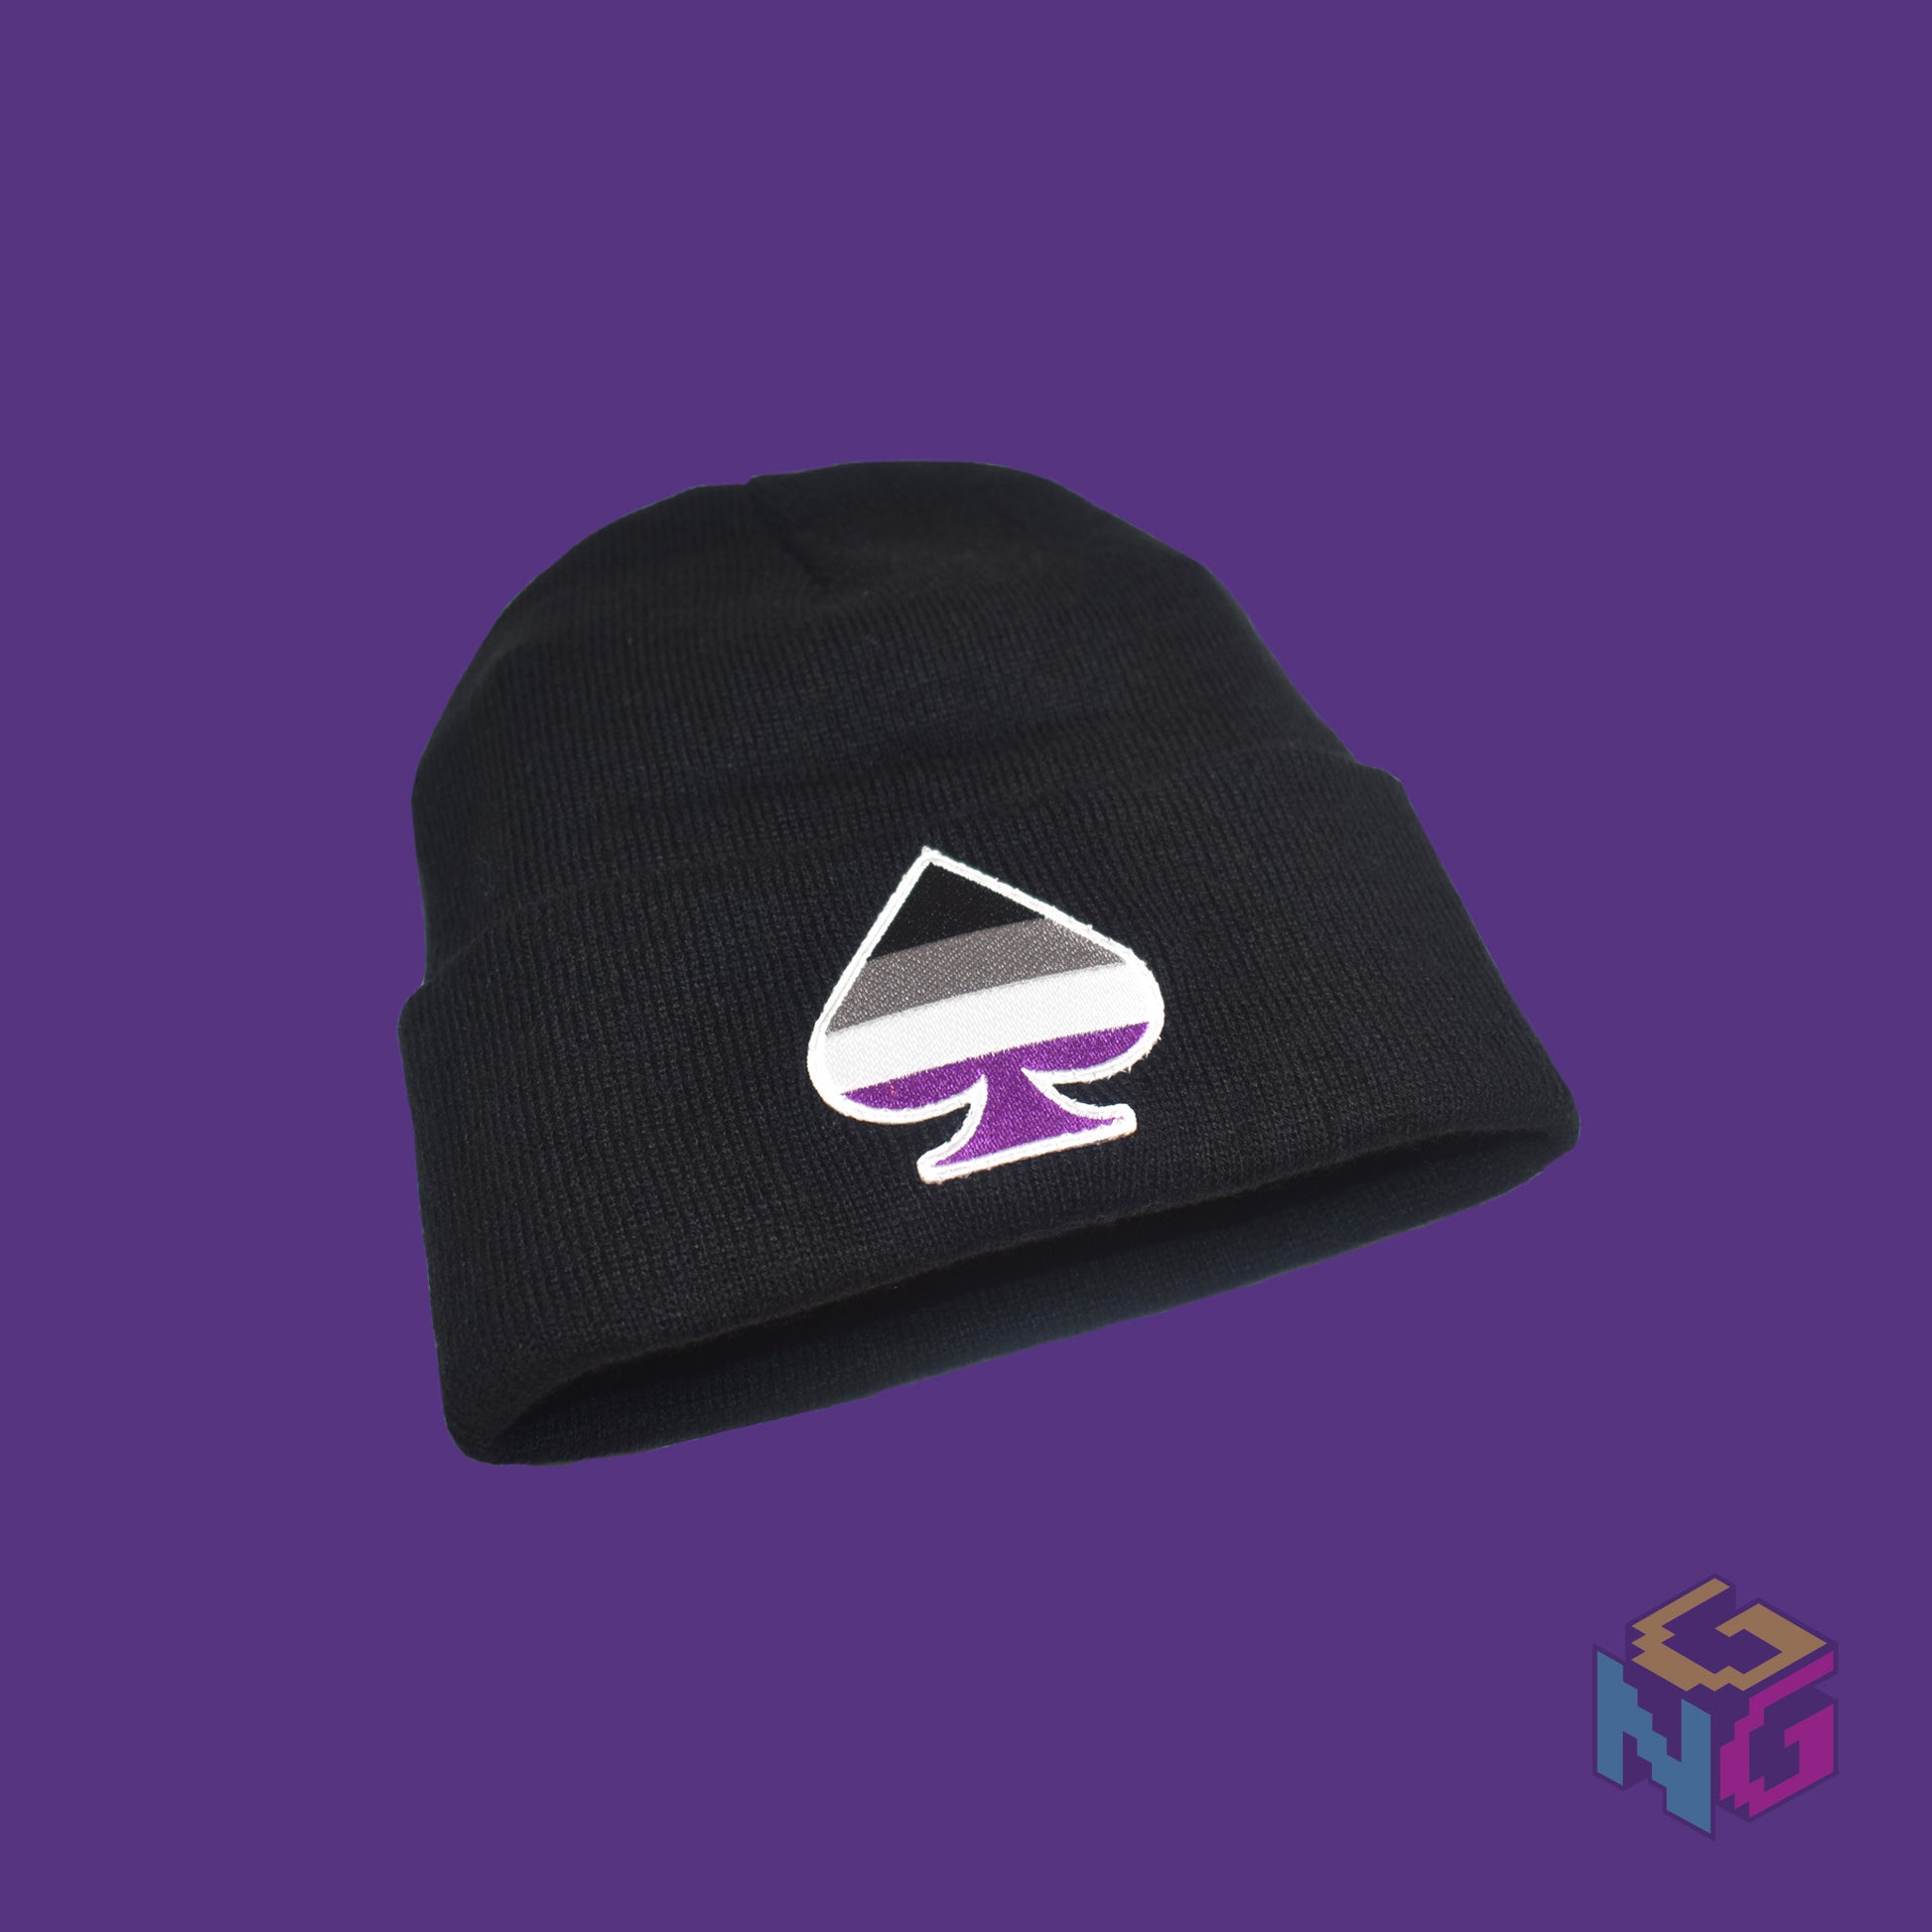 Black knit fabric beanie with the asexual ace of spades symbol in asexual black, white, grey, and purple on the front. It's lying at an angle on a purple background